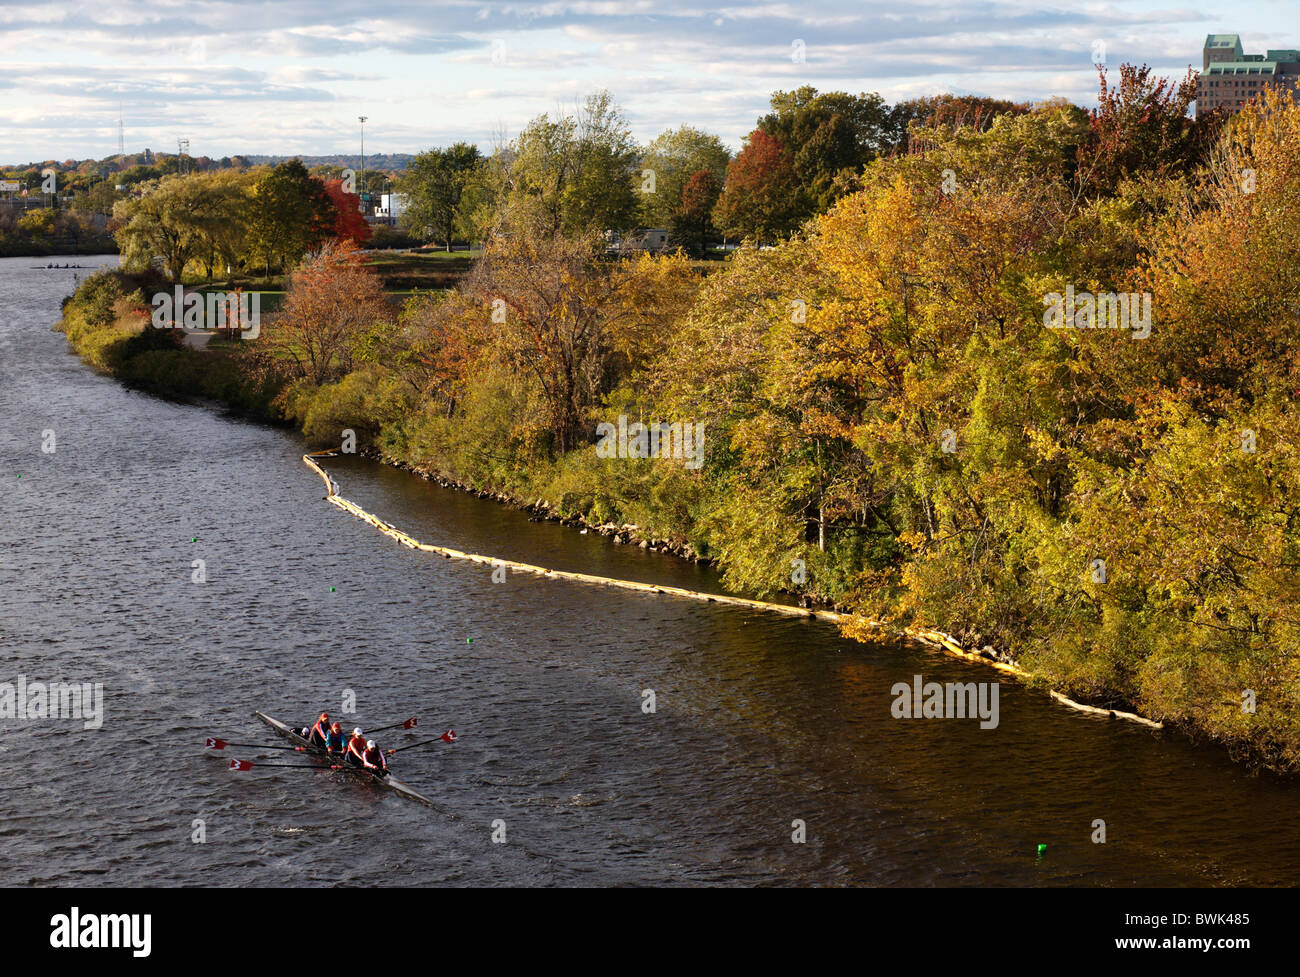 Rowers on the Charles River in Boston, Massachusetts, United States of America Stock Photo